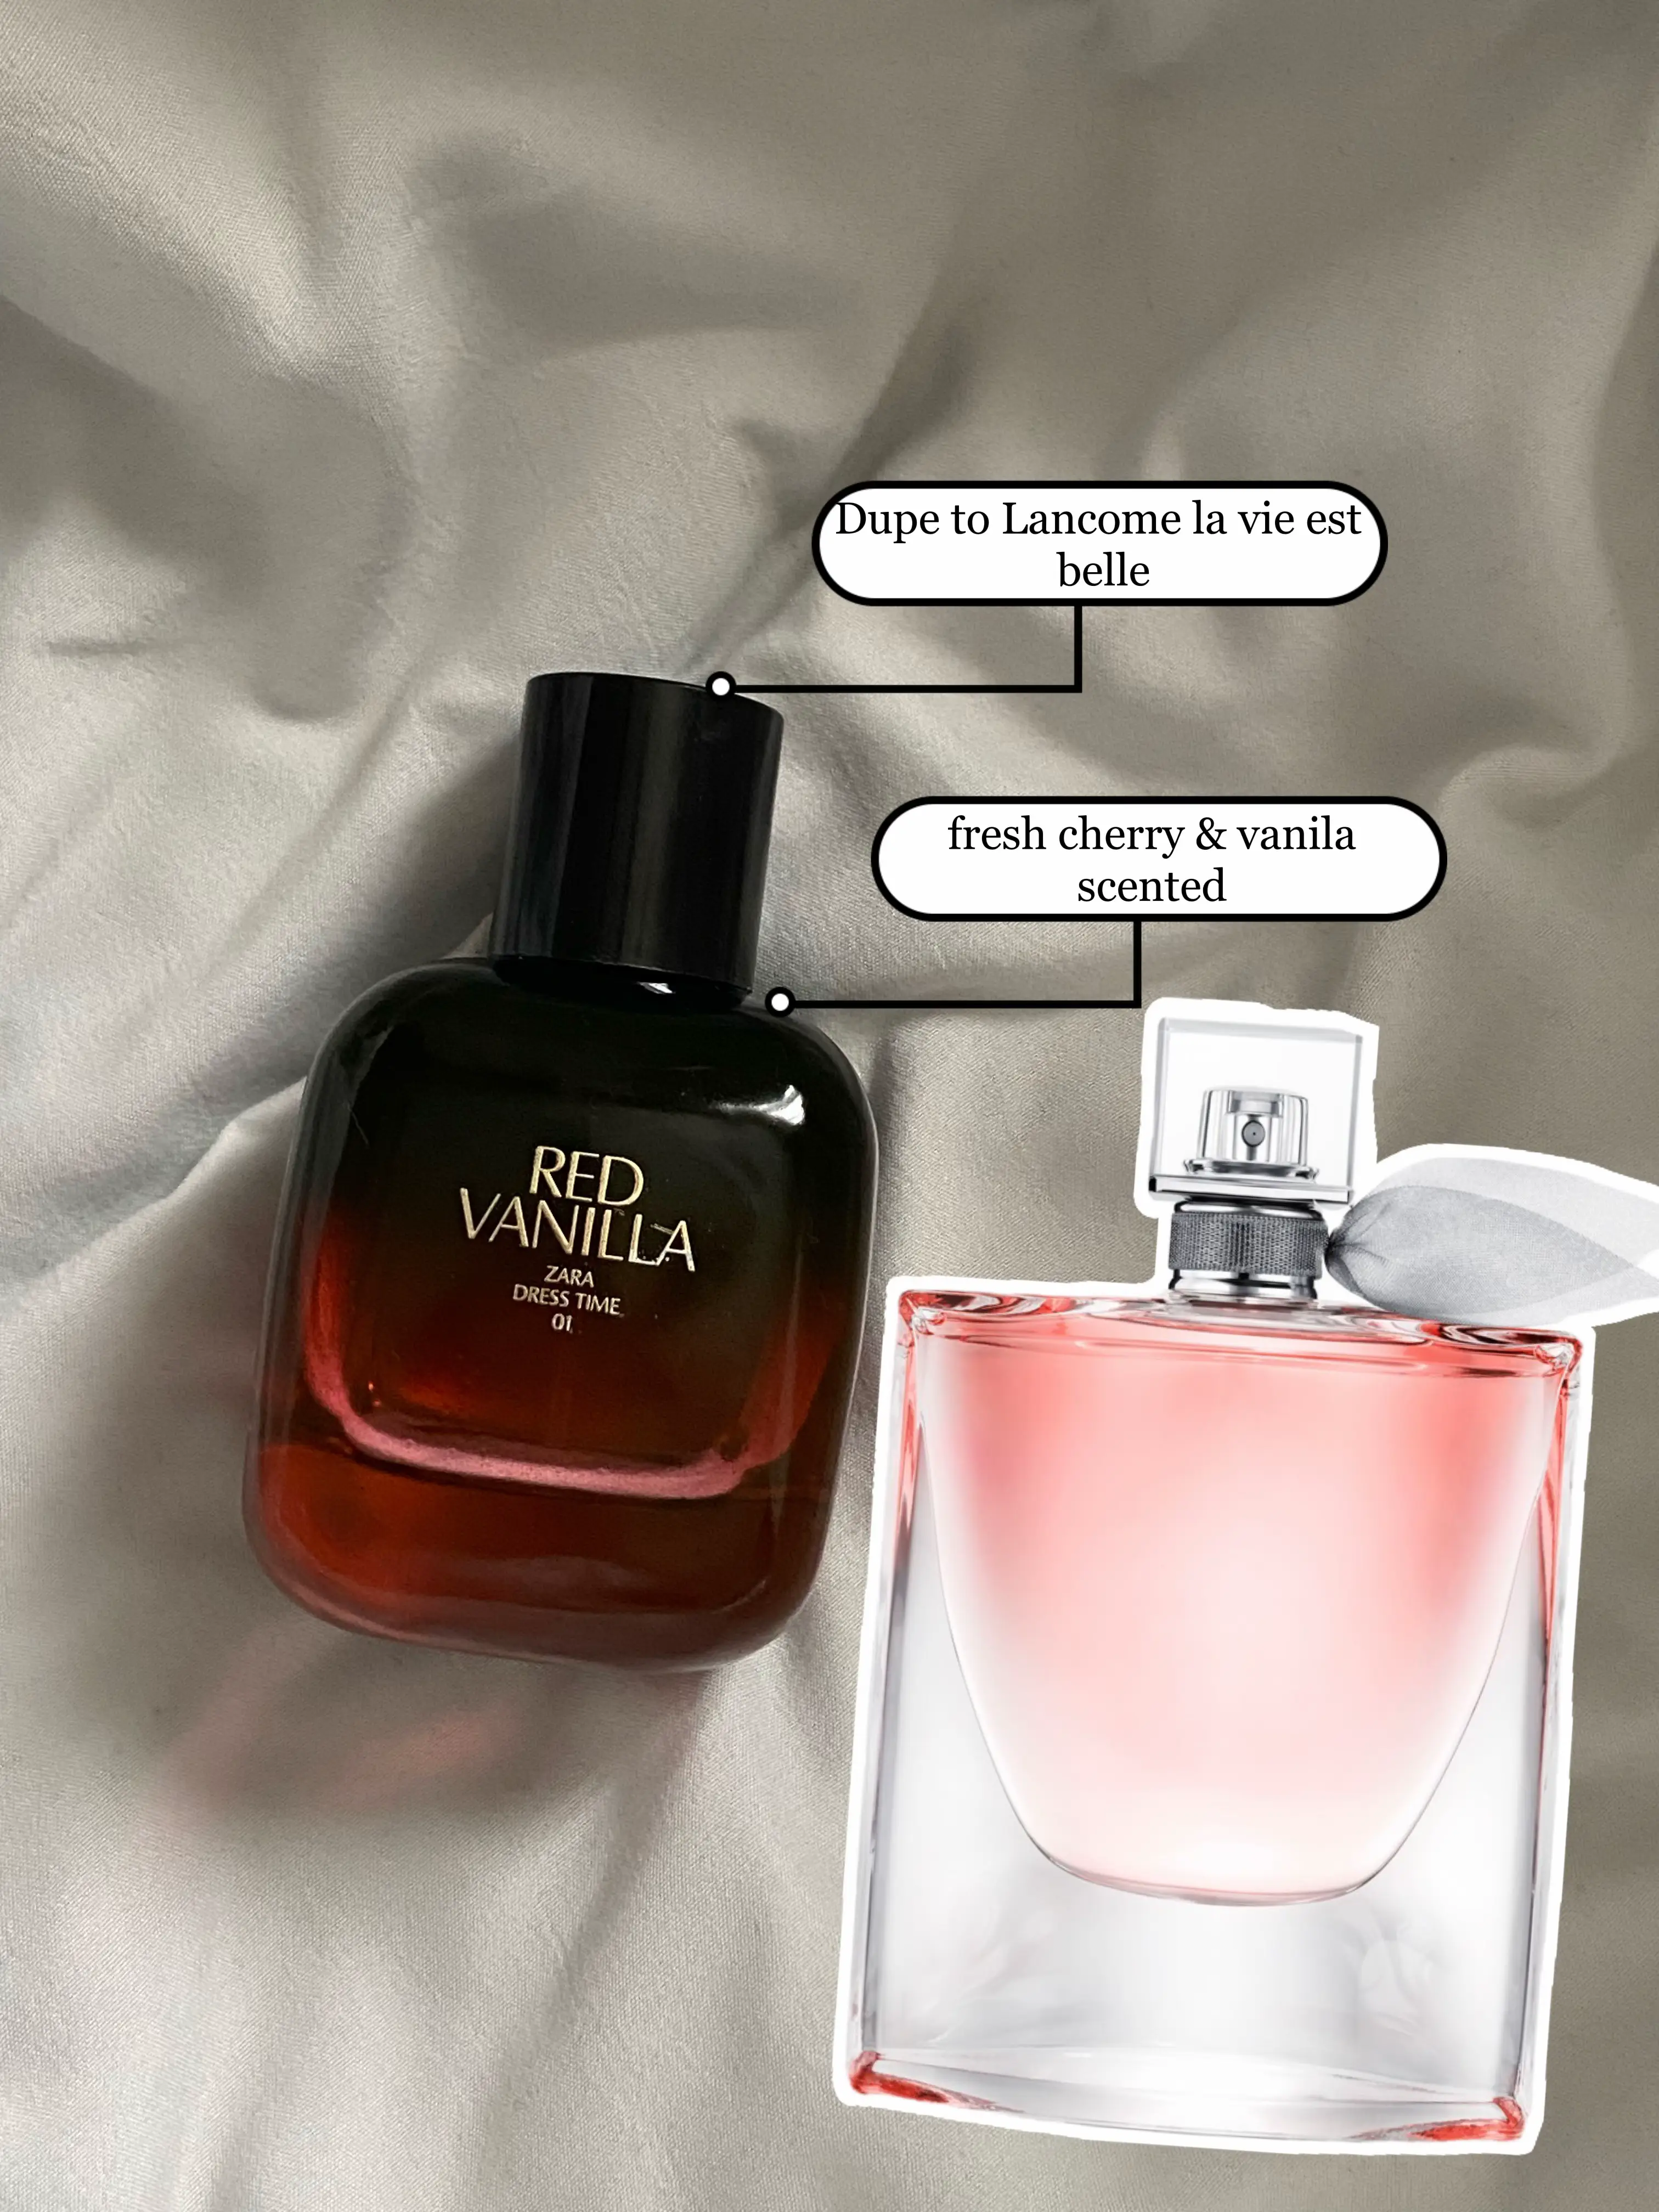 Zara have launched even more high-end perfume dupes, including a